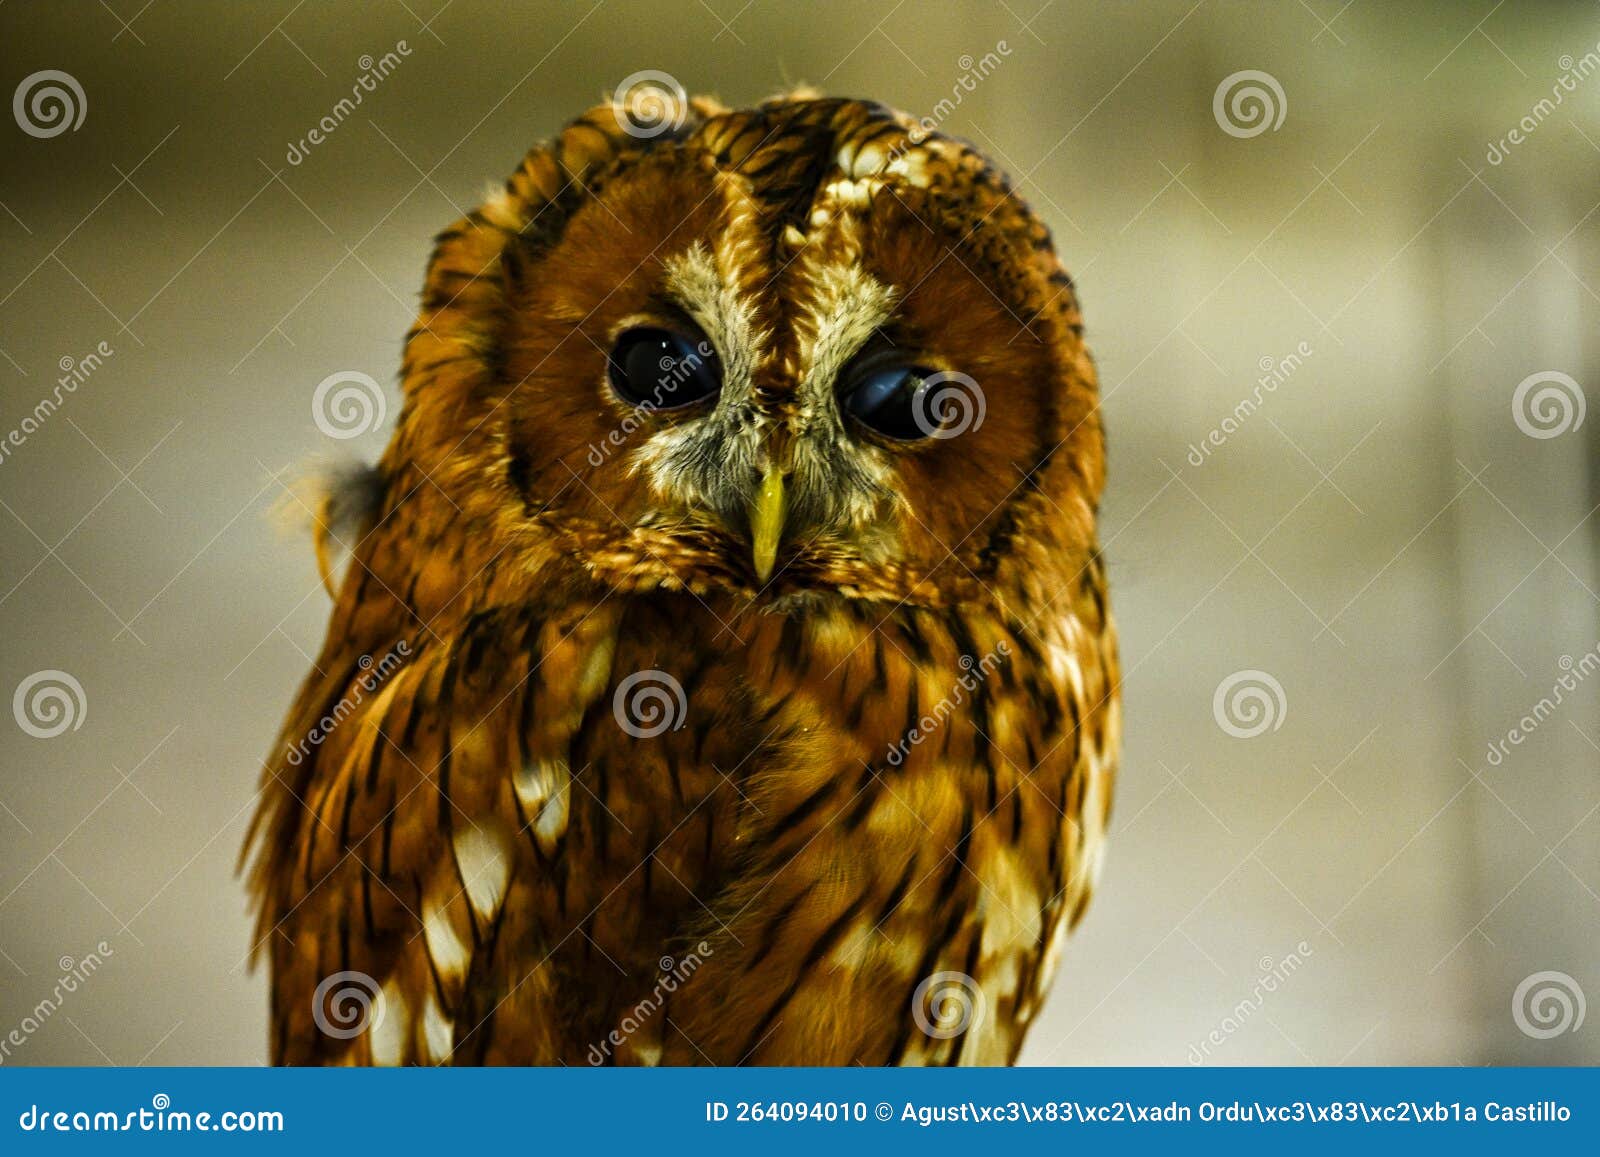 strix aluco or common tawny owl, red phase, is a medium-sized bird of prey in the order strigiformes.